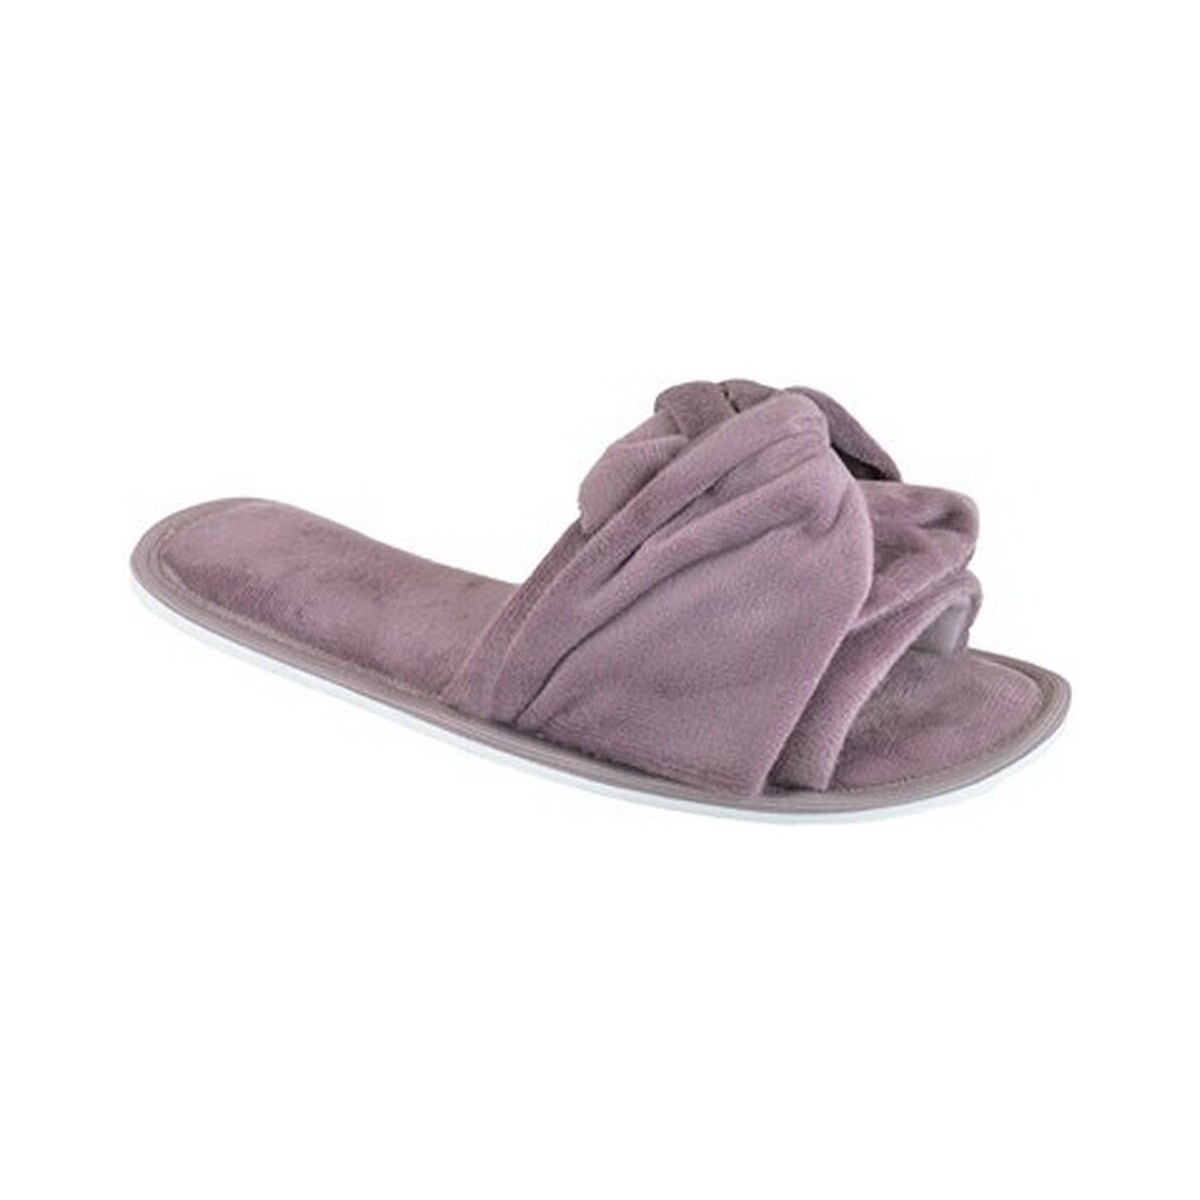 Chaussures Femme Chaussons Slumberzzz 1568 Violet